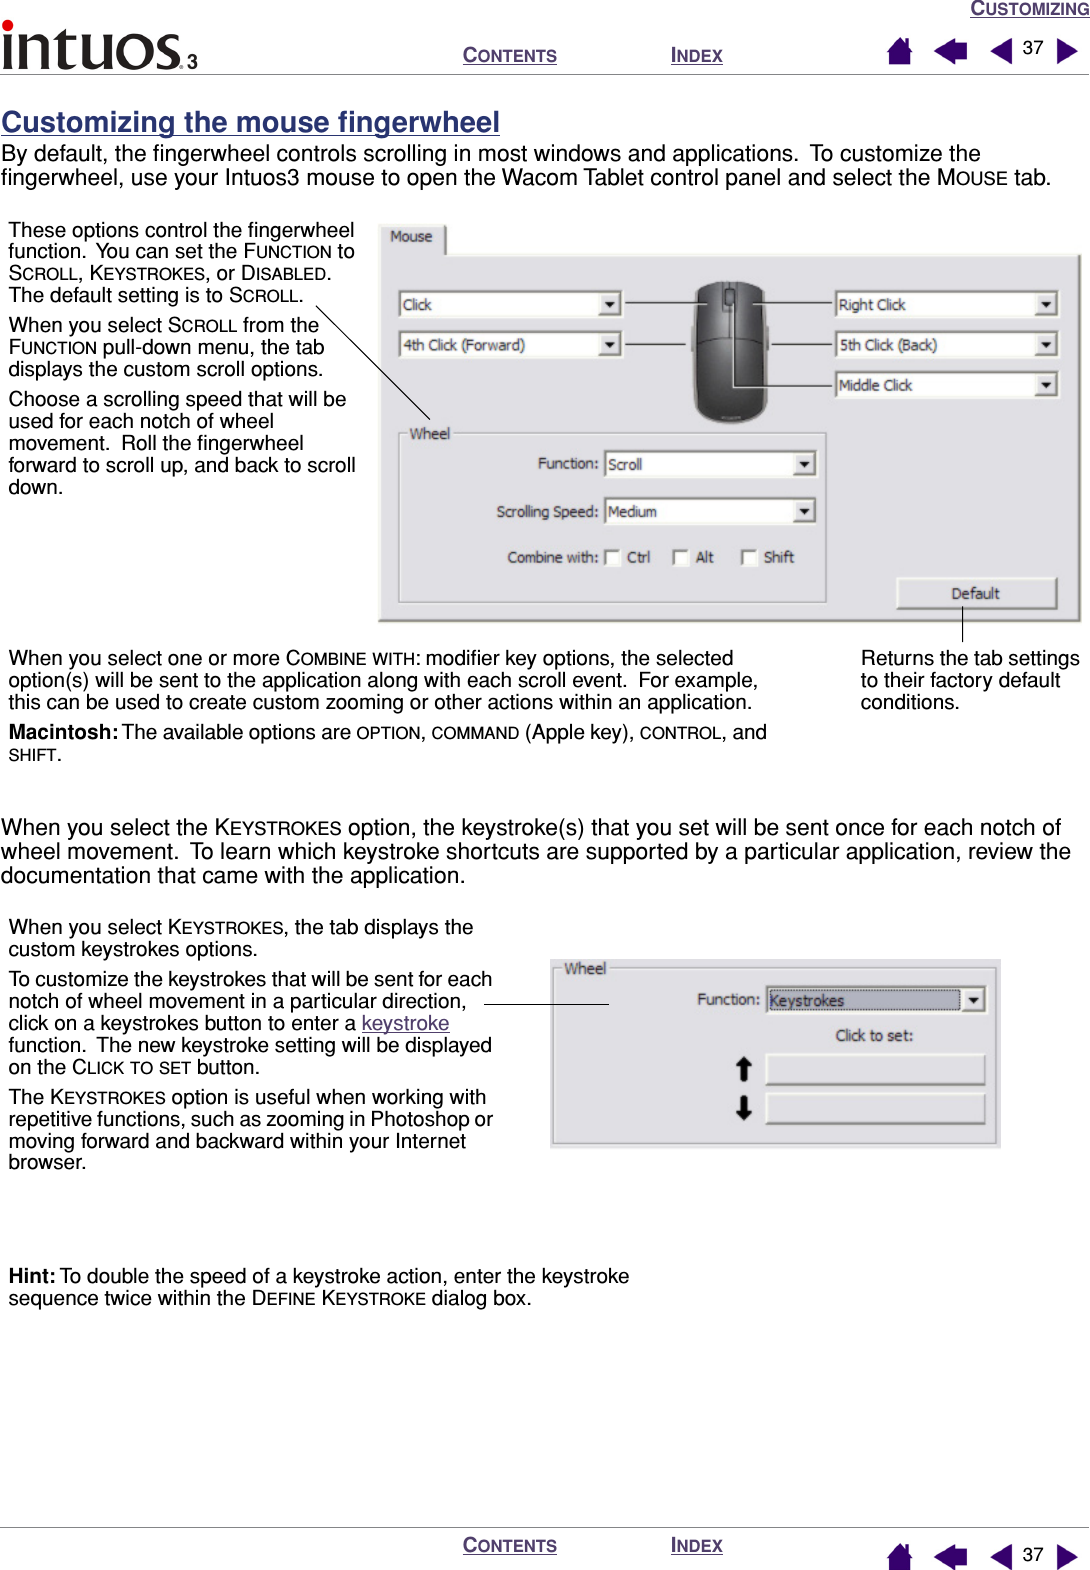 CUSTOMIZINGINDEXCONTENTSINDEXCONTENTS 3737Customizing the mouse ﬁngerwheelBy default, the ﬁngerwheel controls scrolling in most windows and applications.  To customize the ﬁngerwheel, use your Intuos3 mouse to open the Wacom Tablet control panel and select the MOUSE tab. When you select the KEYSTROKES option, the keystroke(s) that you set will be sent once for each notch of wheel movement.  To learn which keystroke shortcuts are supported by a particular application, review the documentation that came with the application.Returns the tab settings to their factory default conditions.These options control the ﬁngerwheel function.  You can set the FUNCTION to SCROLL, KEYSTROKES, or DISABLED.  The default setting is to SCROLL.When you select SCROLL from the FUNCTION pull-down menu, the tab displays the custom scroll options.Choose a scrolling speed that will be used for each notch of wheel movement.  Roll the ﬁngerwheel forward to scroll up, and back to scroll down.When you select one or more COMBINE WITH: modiﬁer key options, the selected option(s) will be sent to the application along with each scroll event.  For example, this can be used to create custom zooming or other actions within an application.Macintosh: The available options are OPTION, COMMAND (Apple key), CONTROL, and SHIFT.When you select KEYSTROKES, the tab displays the custom keystrokes options.To customize the keystrokes that will be sent for each notch of wheel movement in a particular direction, click on a keystrokes button to enter a keystroke function.  The new keystroke setting will be displayed on the CLICK TO SET button.The KEYSTROKES option is useful when working with repetitive functions, such as zooming in Photoshop or moving forward and backward within your Internet browser.Hint: To double the speed of a keystroke action, enter the keystroke sequence twice within the DEFINE KEYSTROKE dialog box.